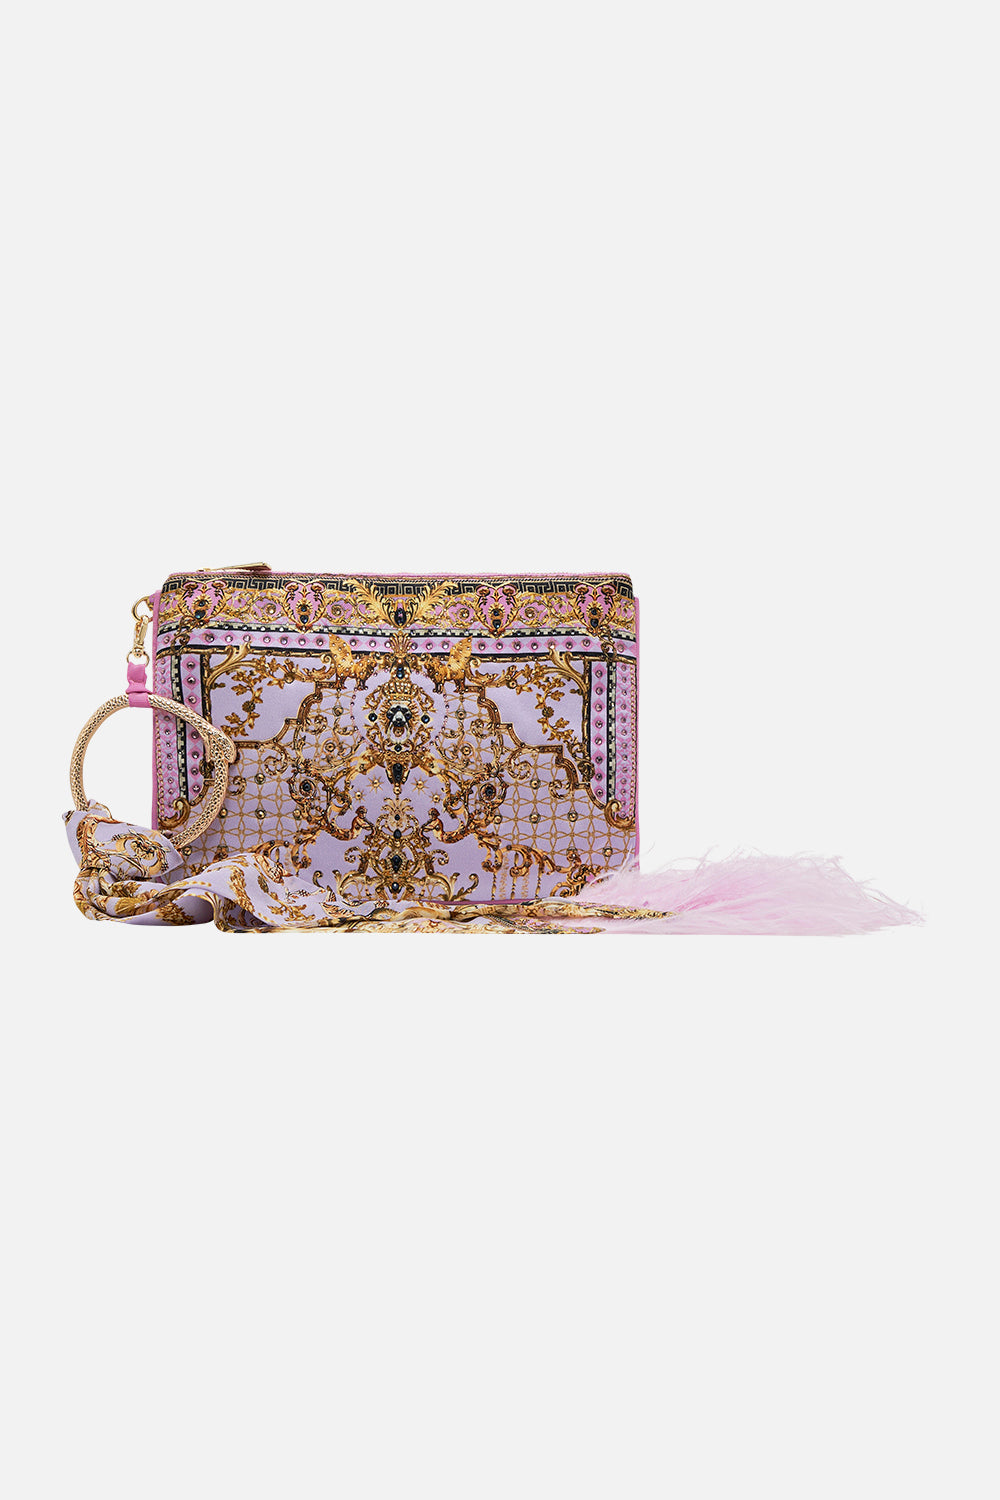 Product view of CAMILLA printed silk clutch in Lavender Ever After  print